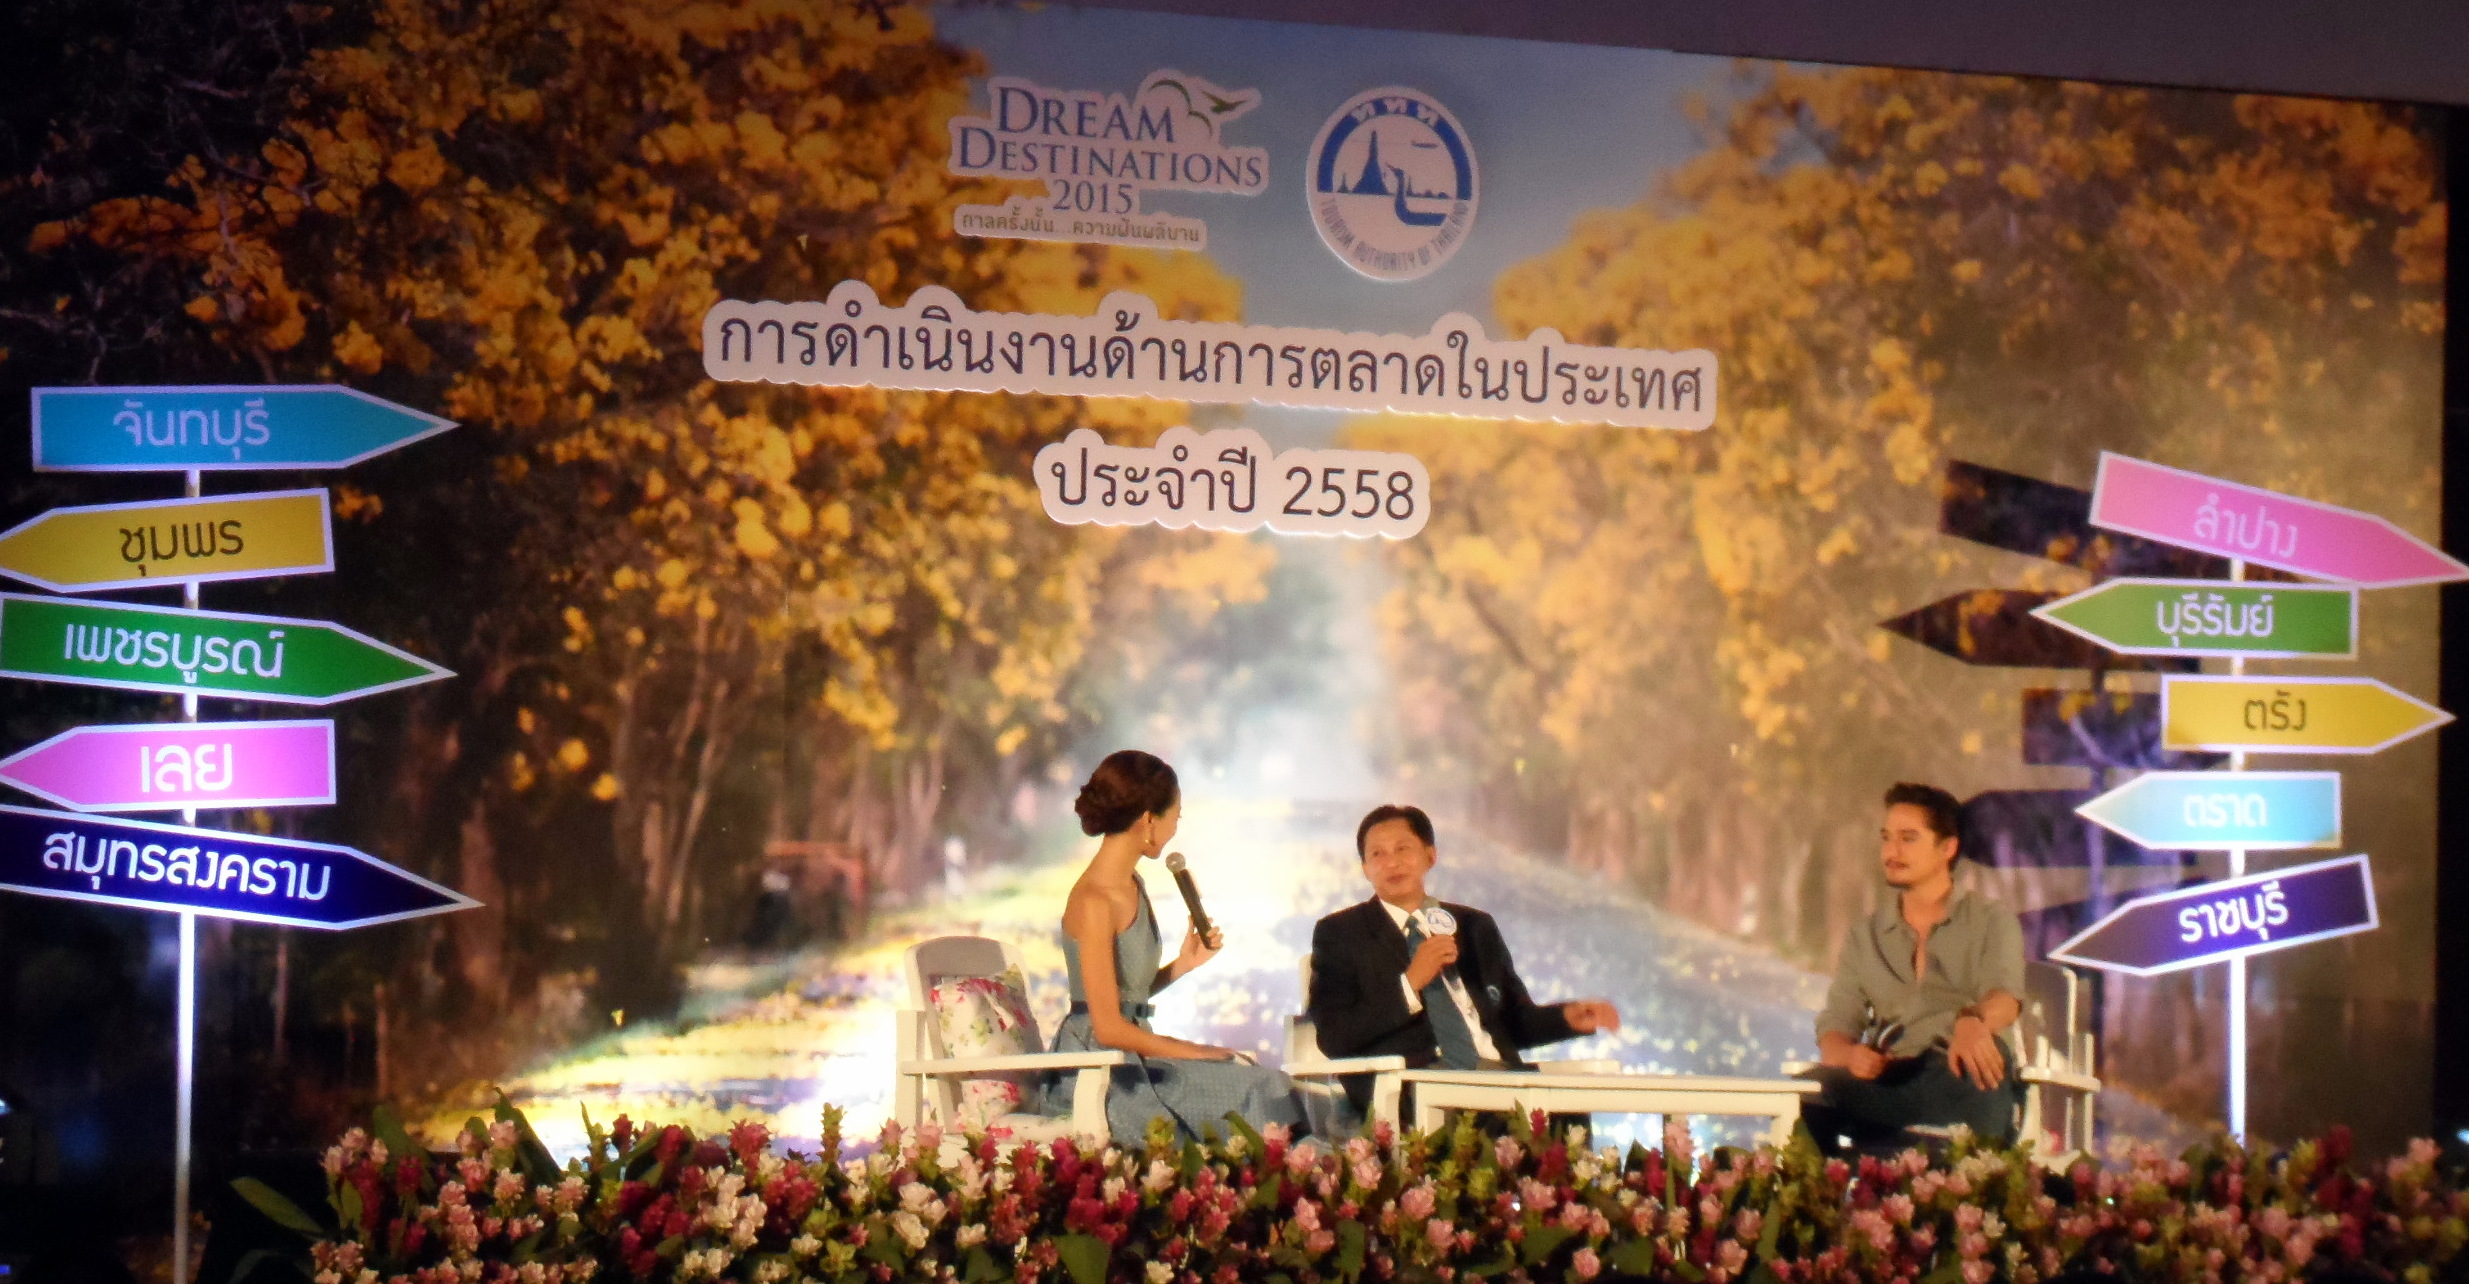 Mr. Anupharp Thirarath, TAT Deputy Governor for Domestic Marketing, and popular Thai actor-entertainer Ananda Everingham plugging domestic tourism. 